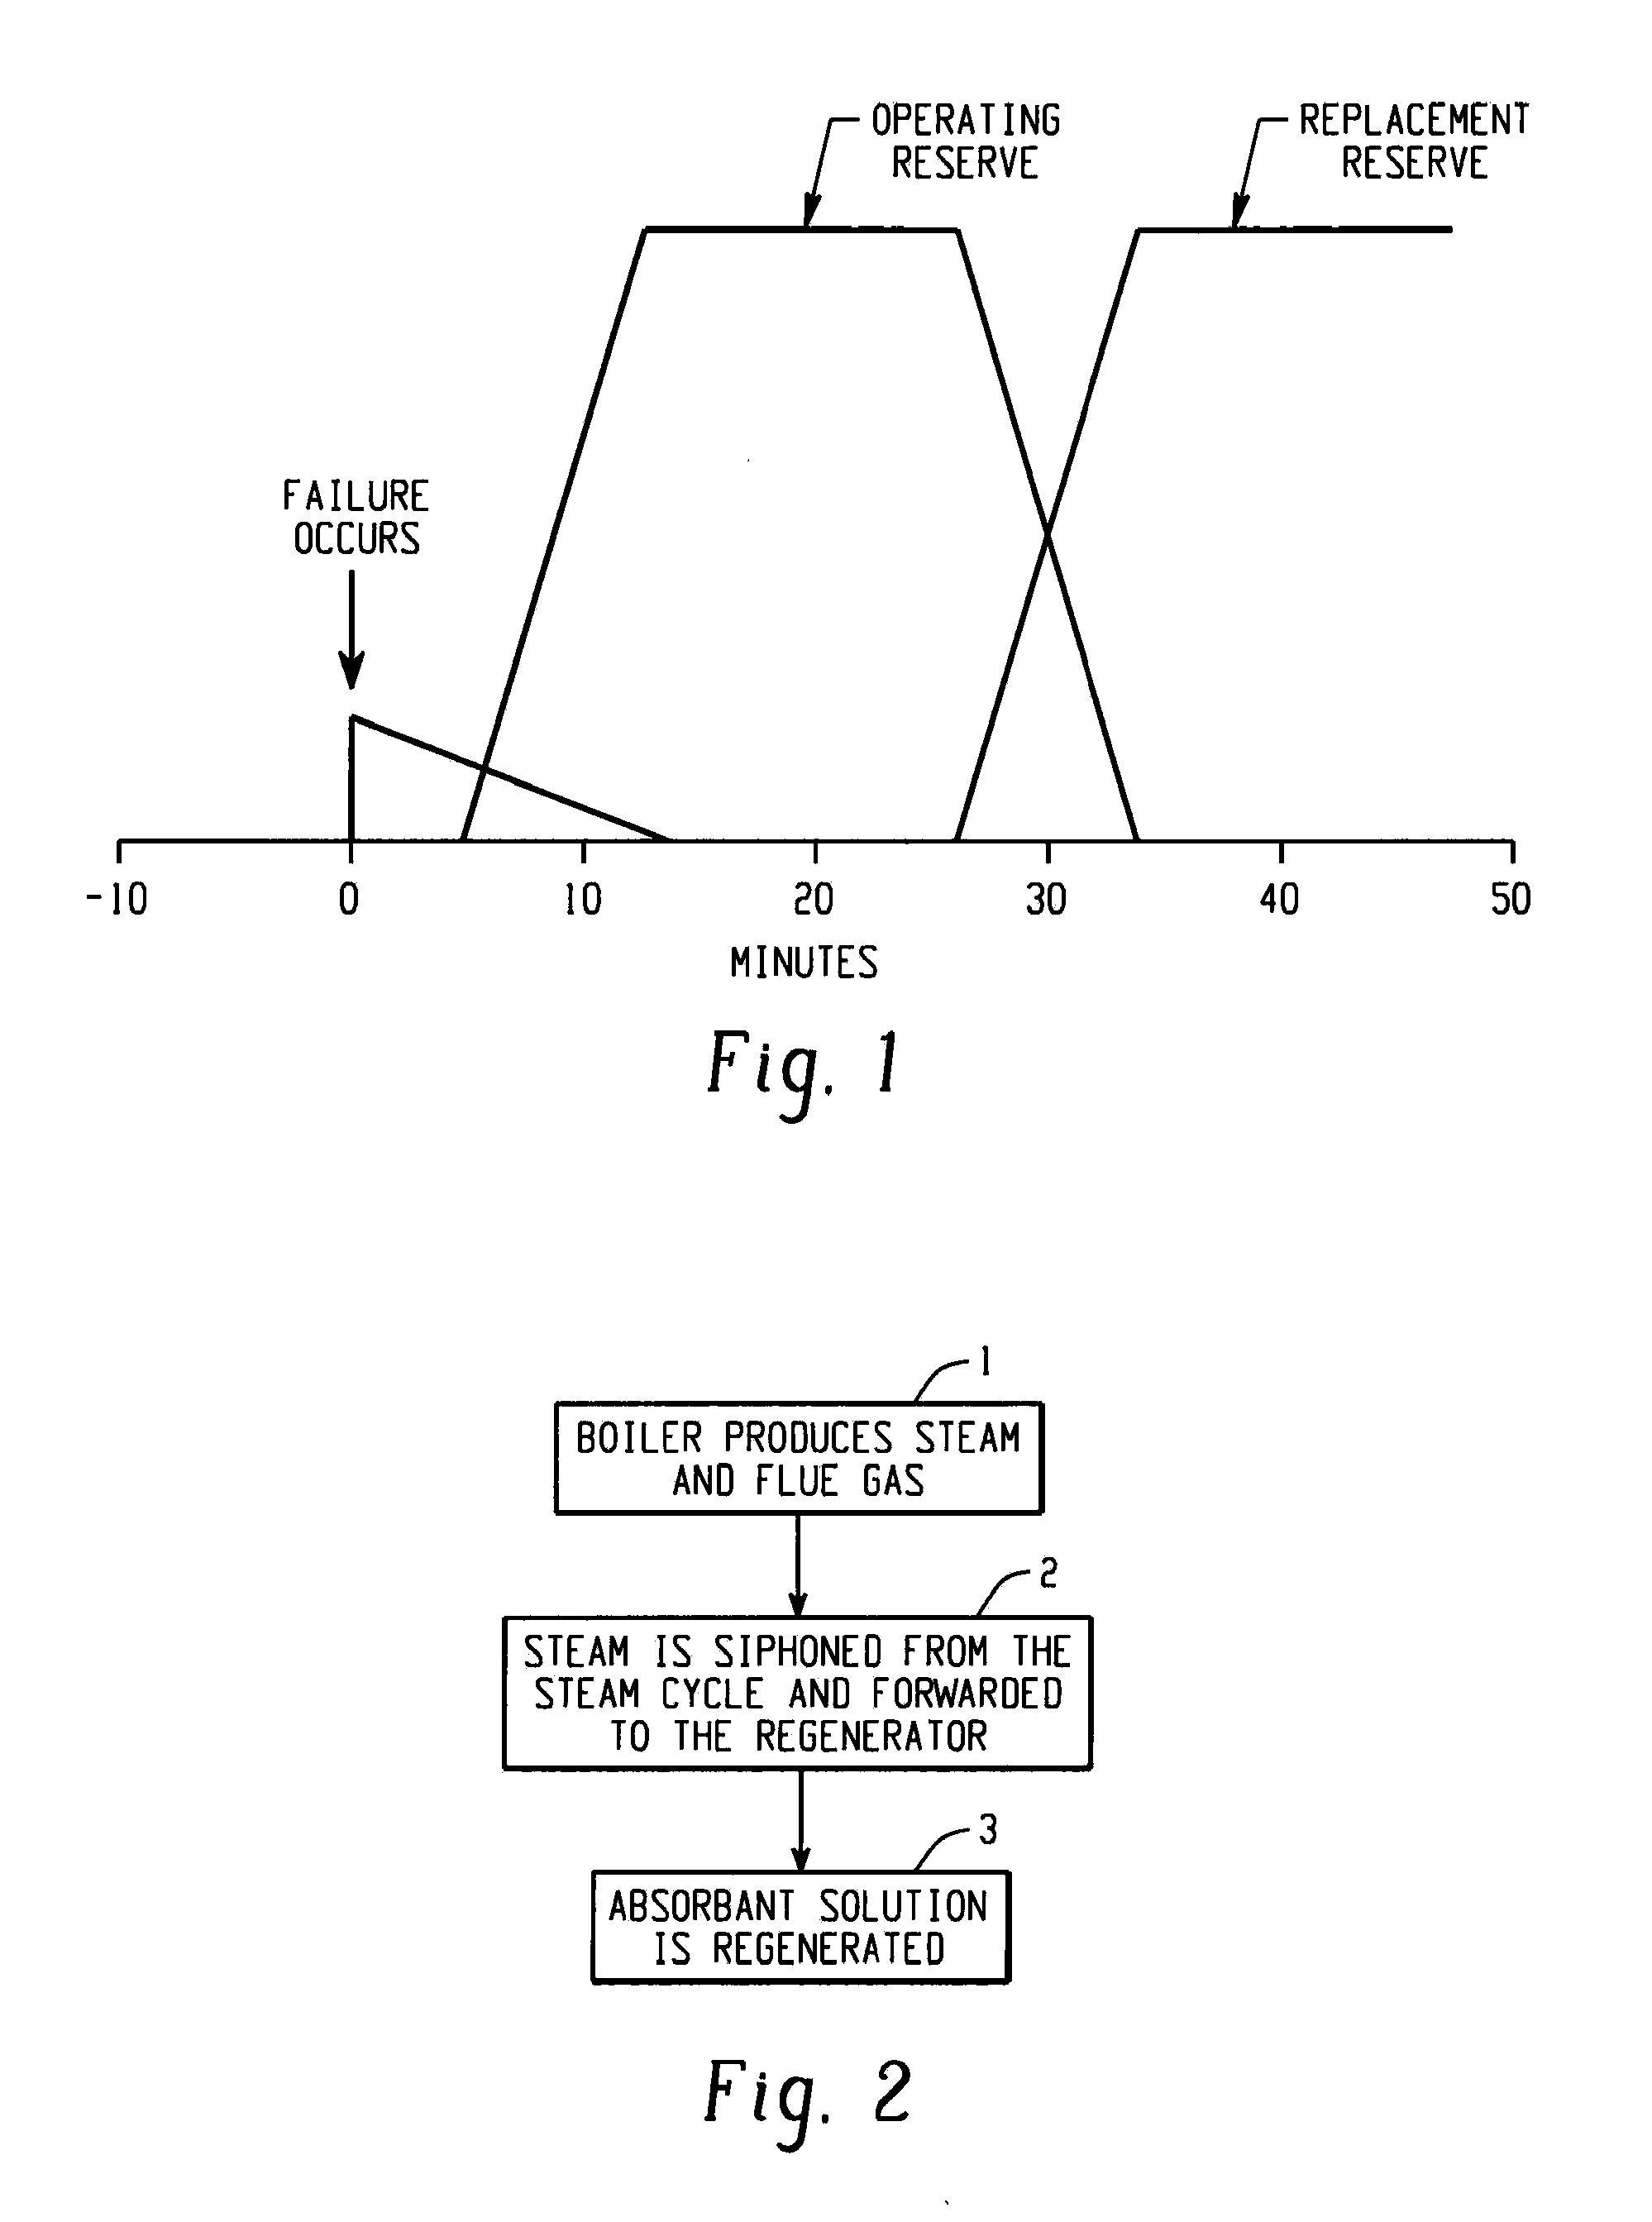 Methods for using a carbon dioxide capture system as an operating reserve